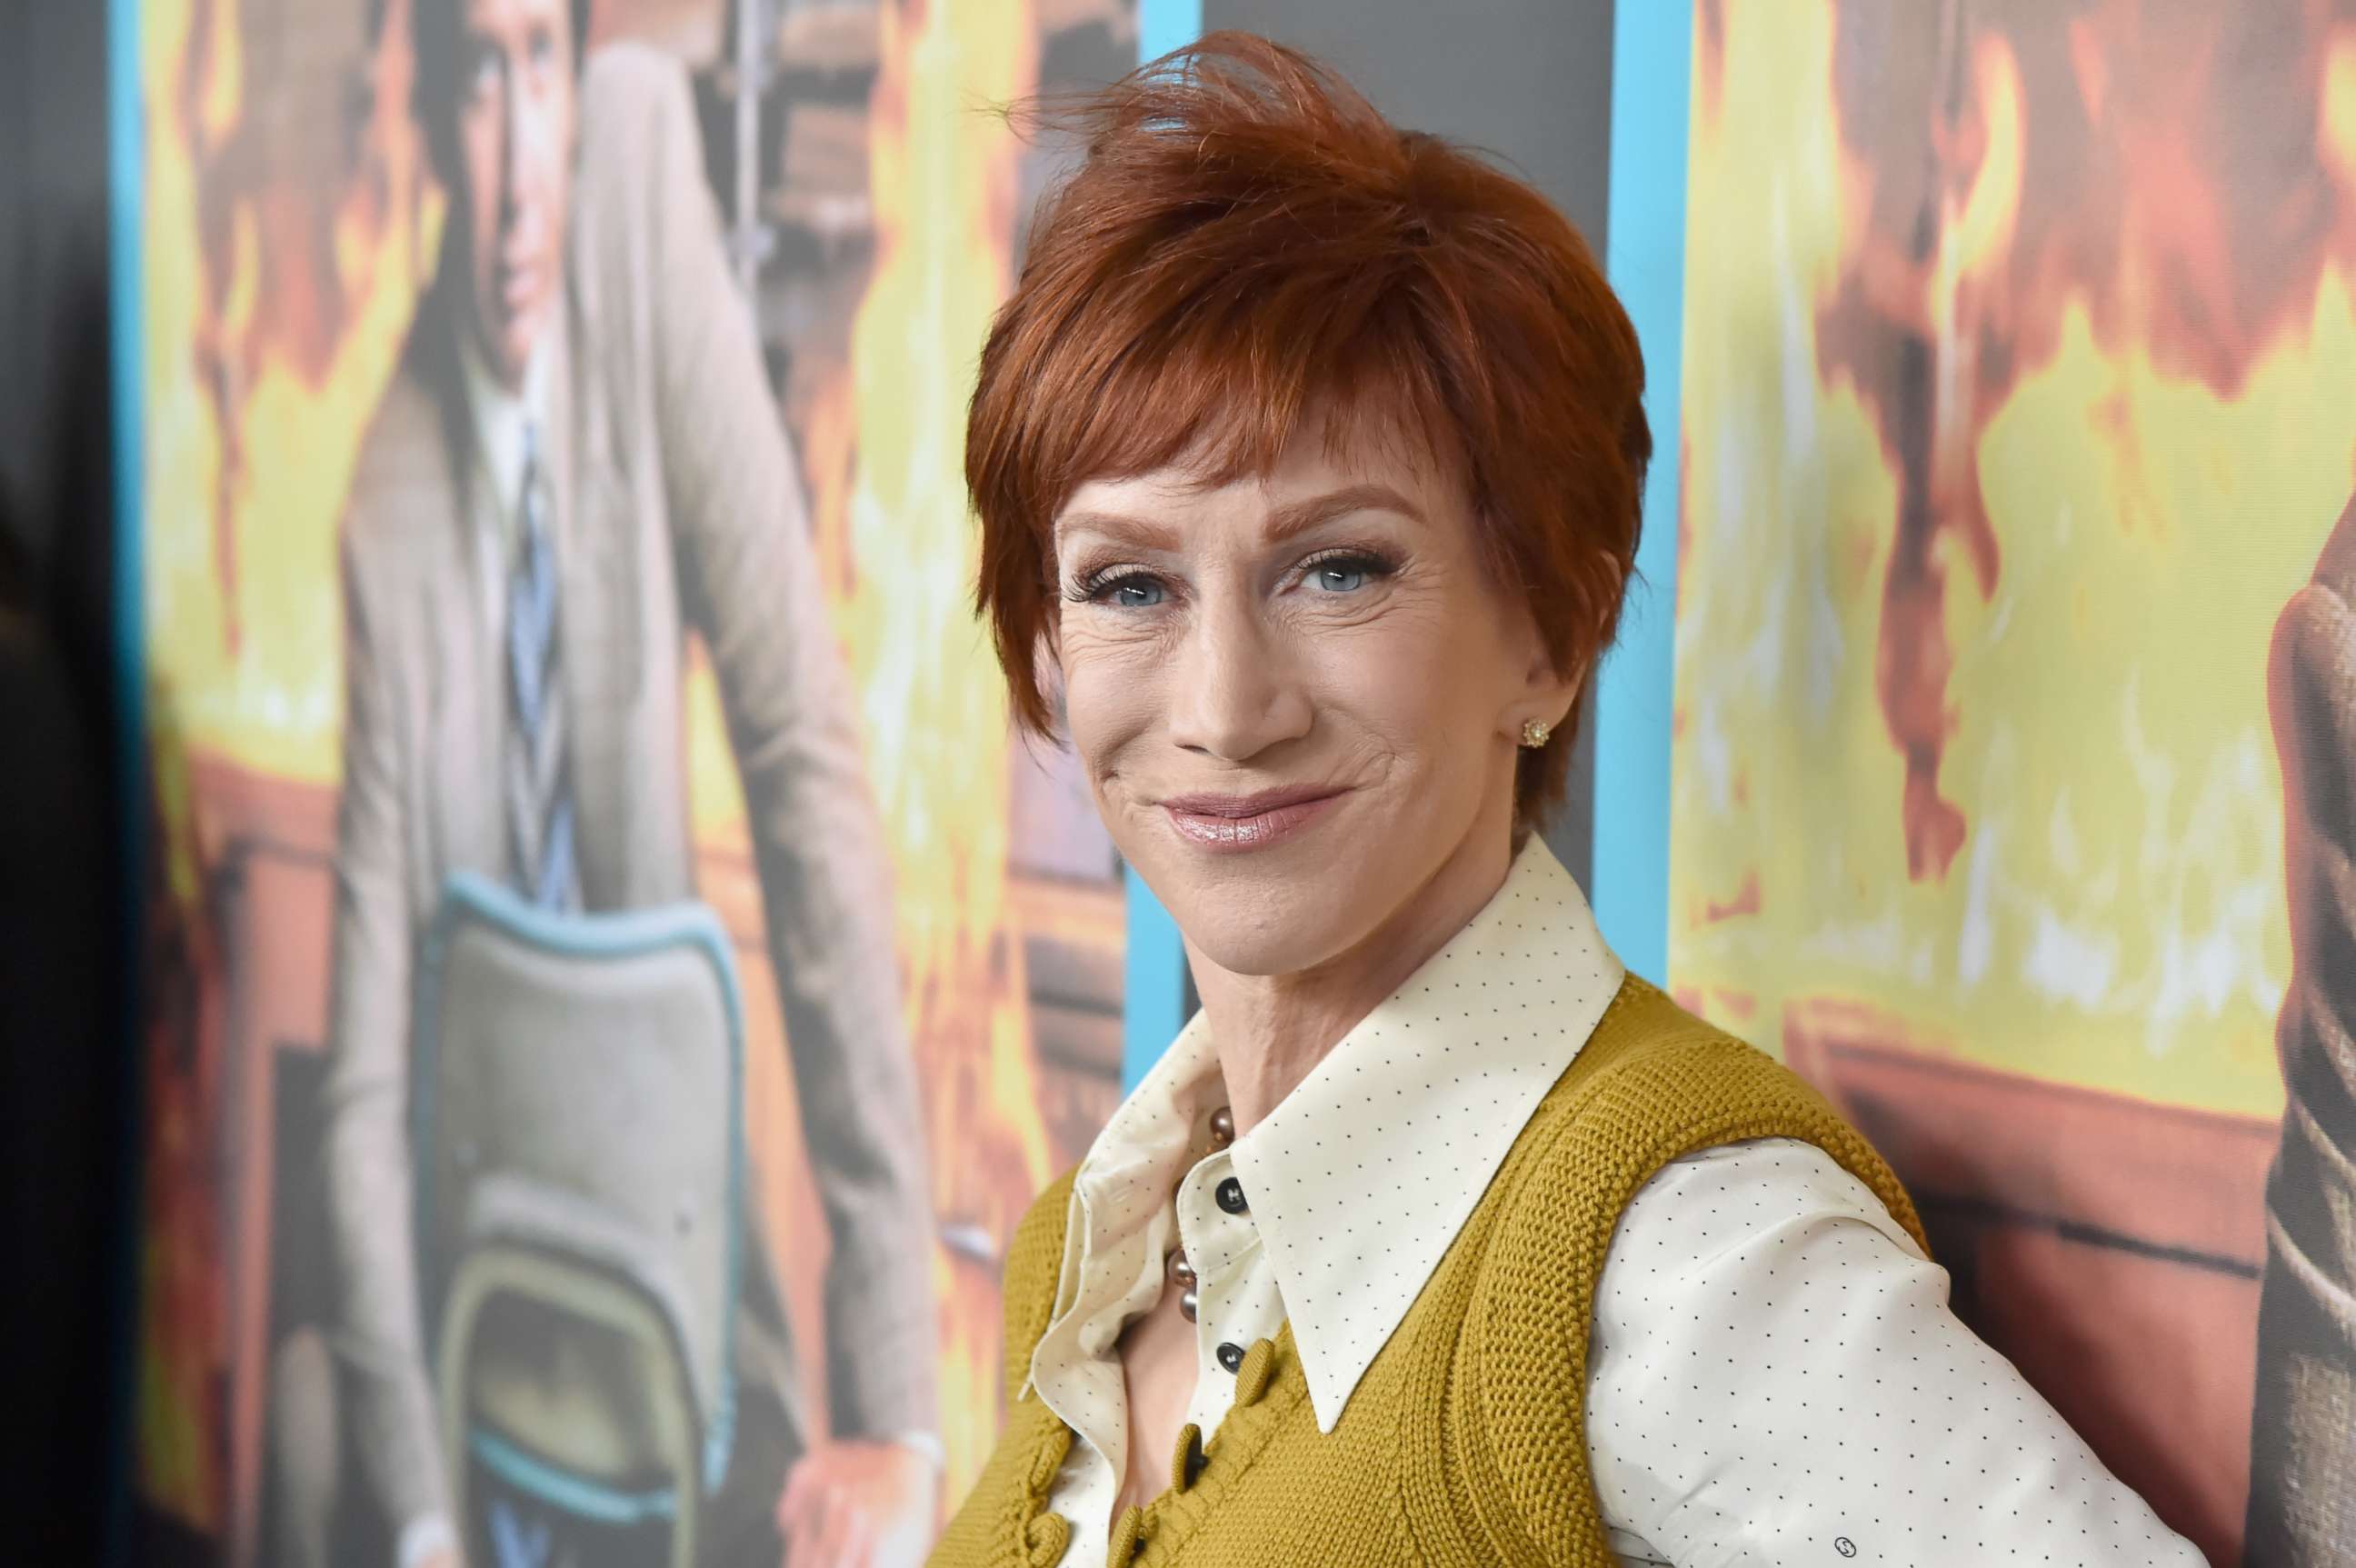 PHOTO: Kathy Griffin attends an HBO screening at Avalon on March 14, 2018 in Hollywood, Calif.